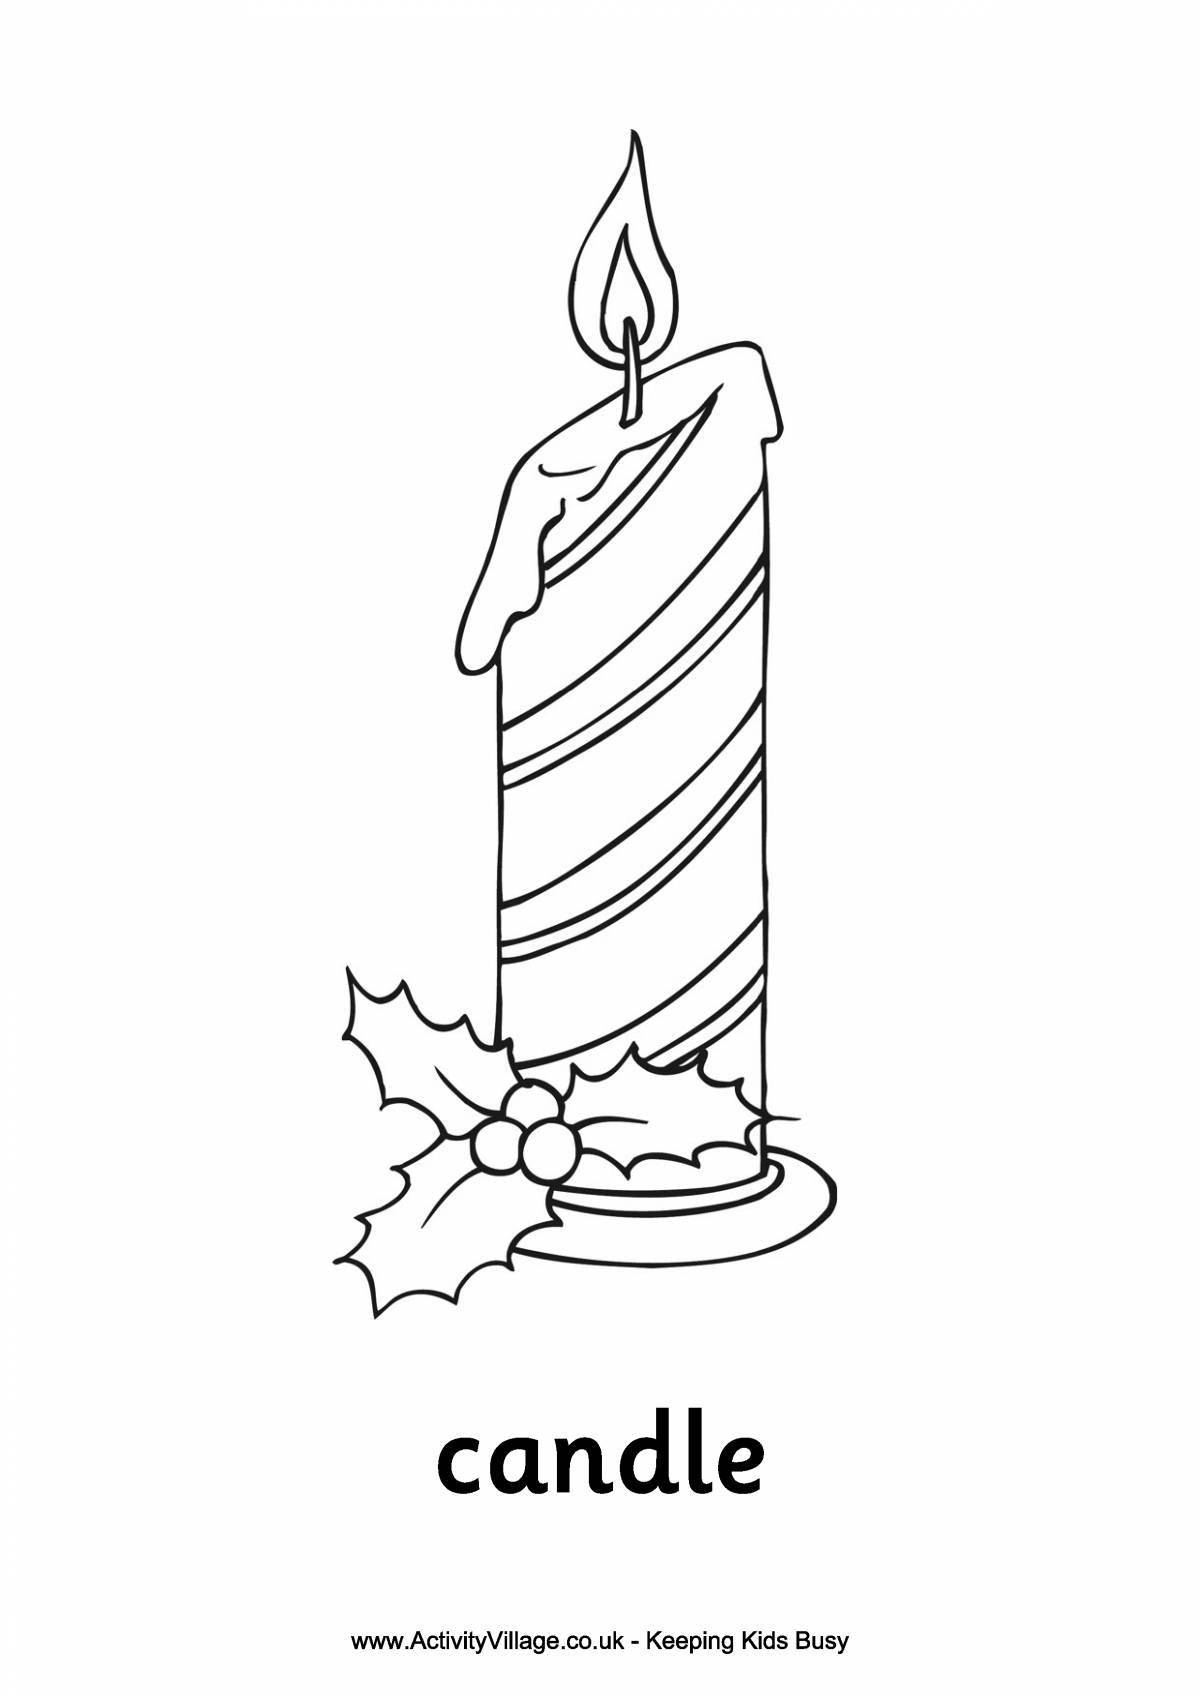 Adorable Christmas Candle coloring book